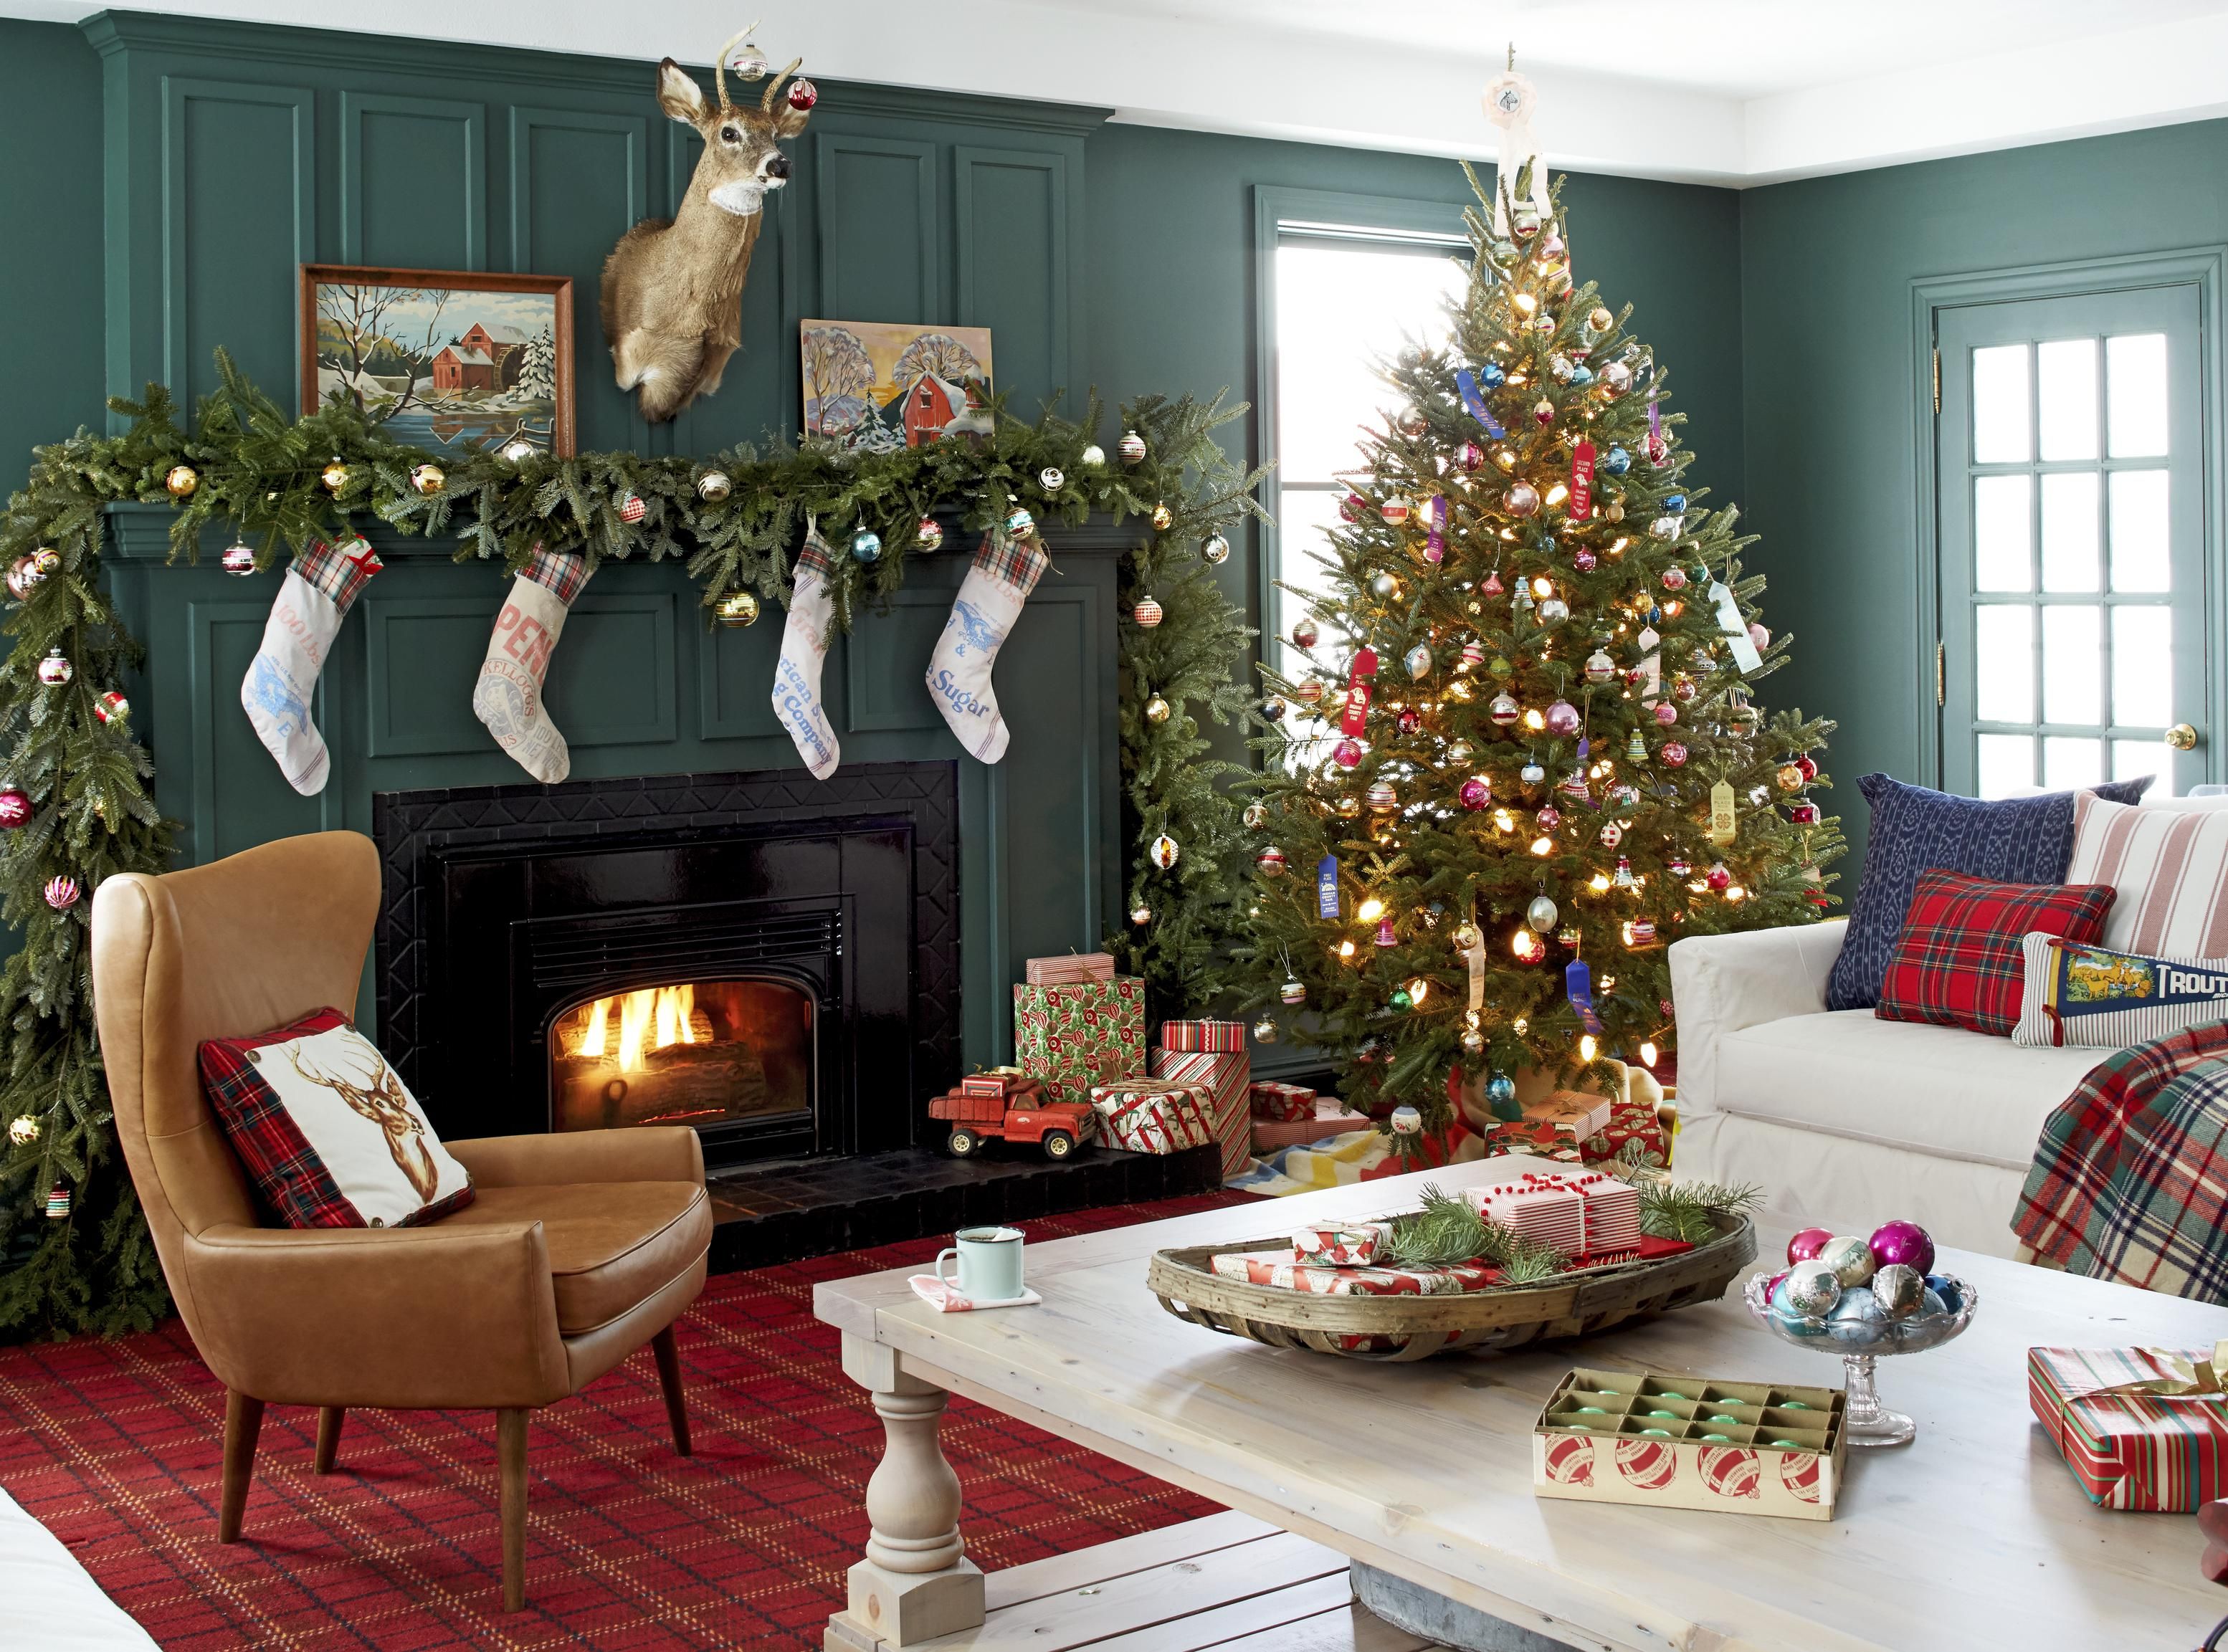 23 Christmas Living Room Decorating Ideas How To Decorate A Living Room For Christmas,Pantone Color Of The Year 2019 Clothing